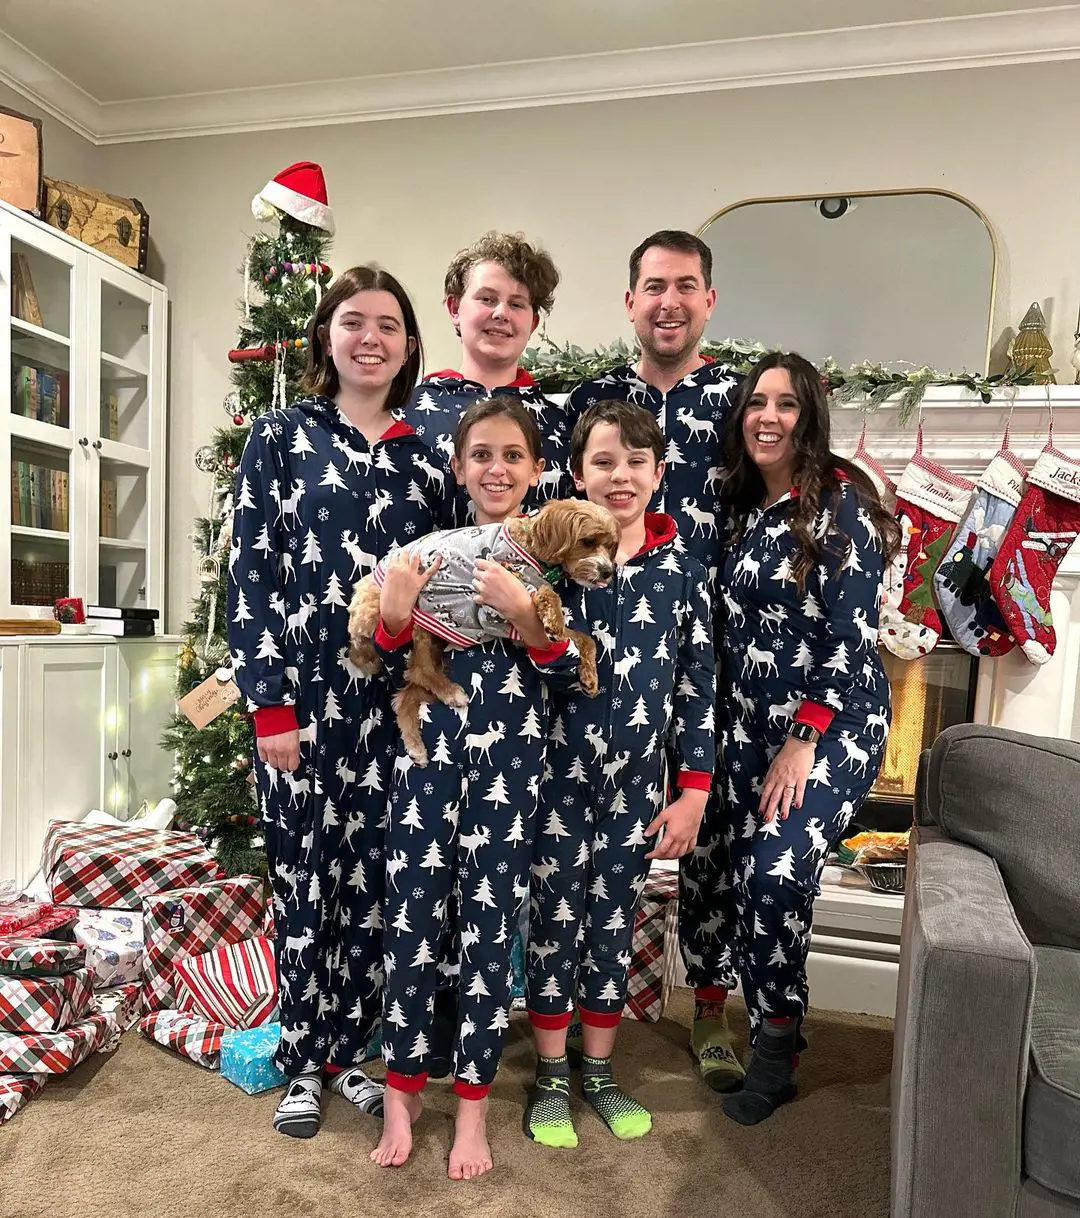 Six members of traveling family Wanderlust Crew celebrate holidays together wearing matching Pajamas on December 25, 2022.